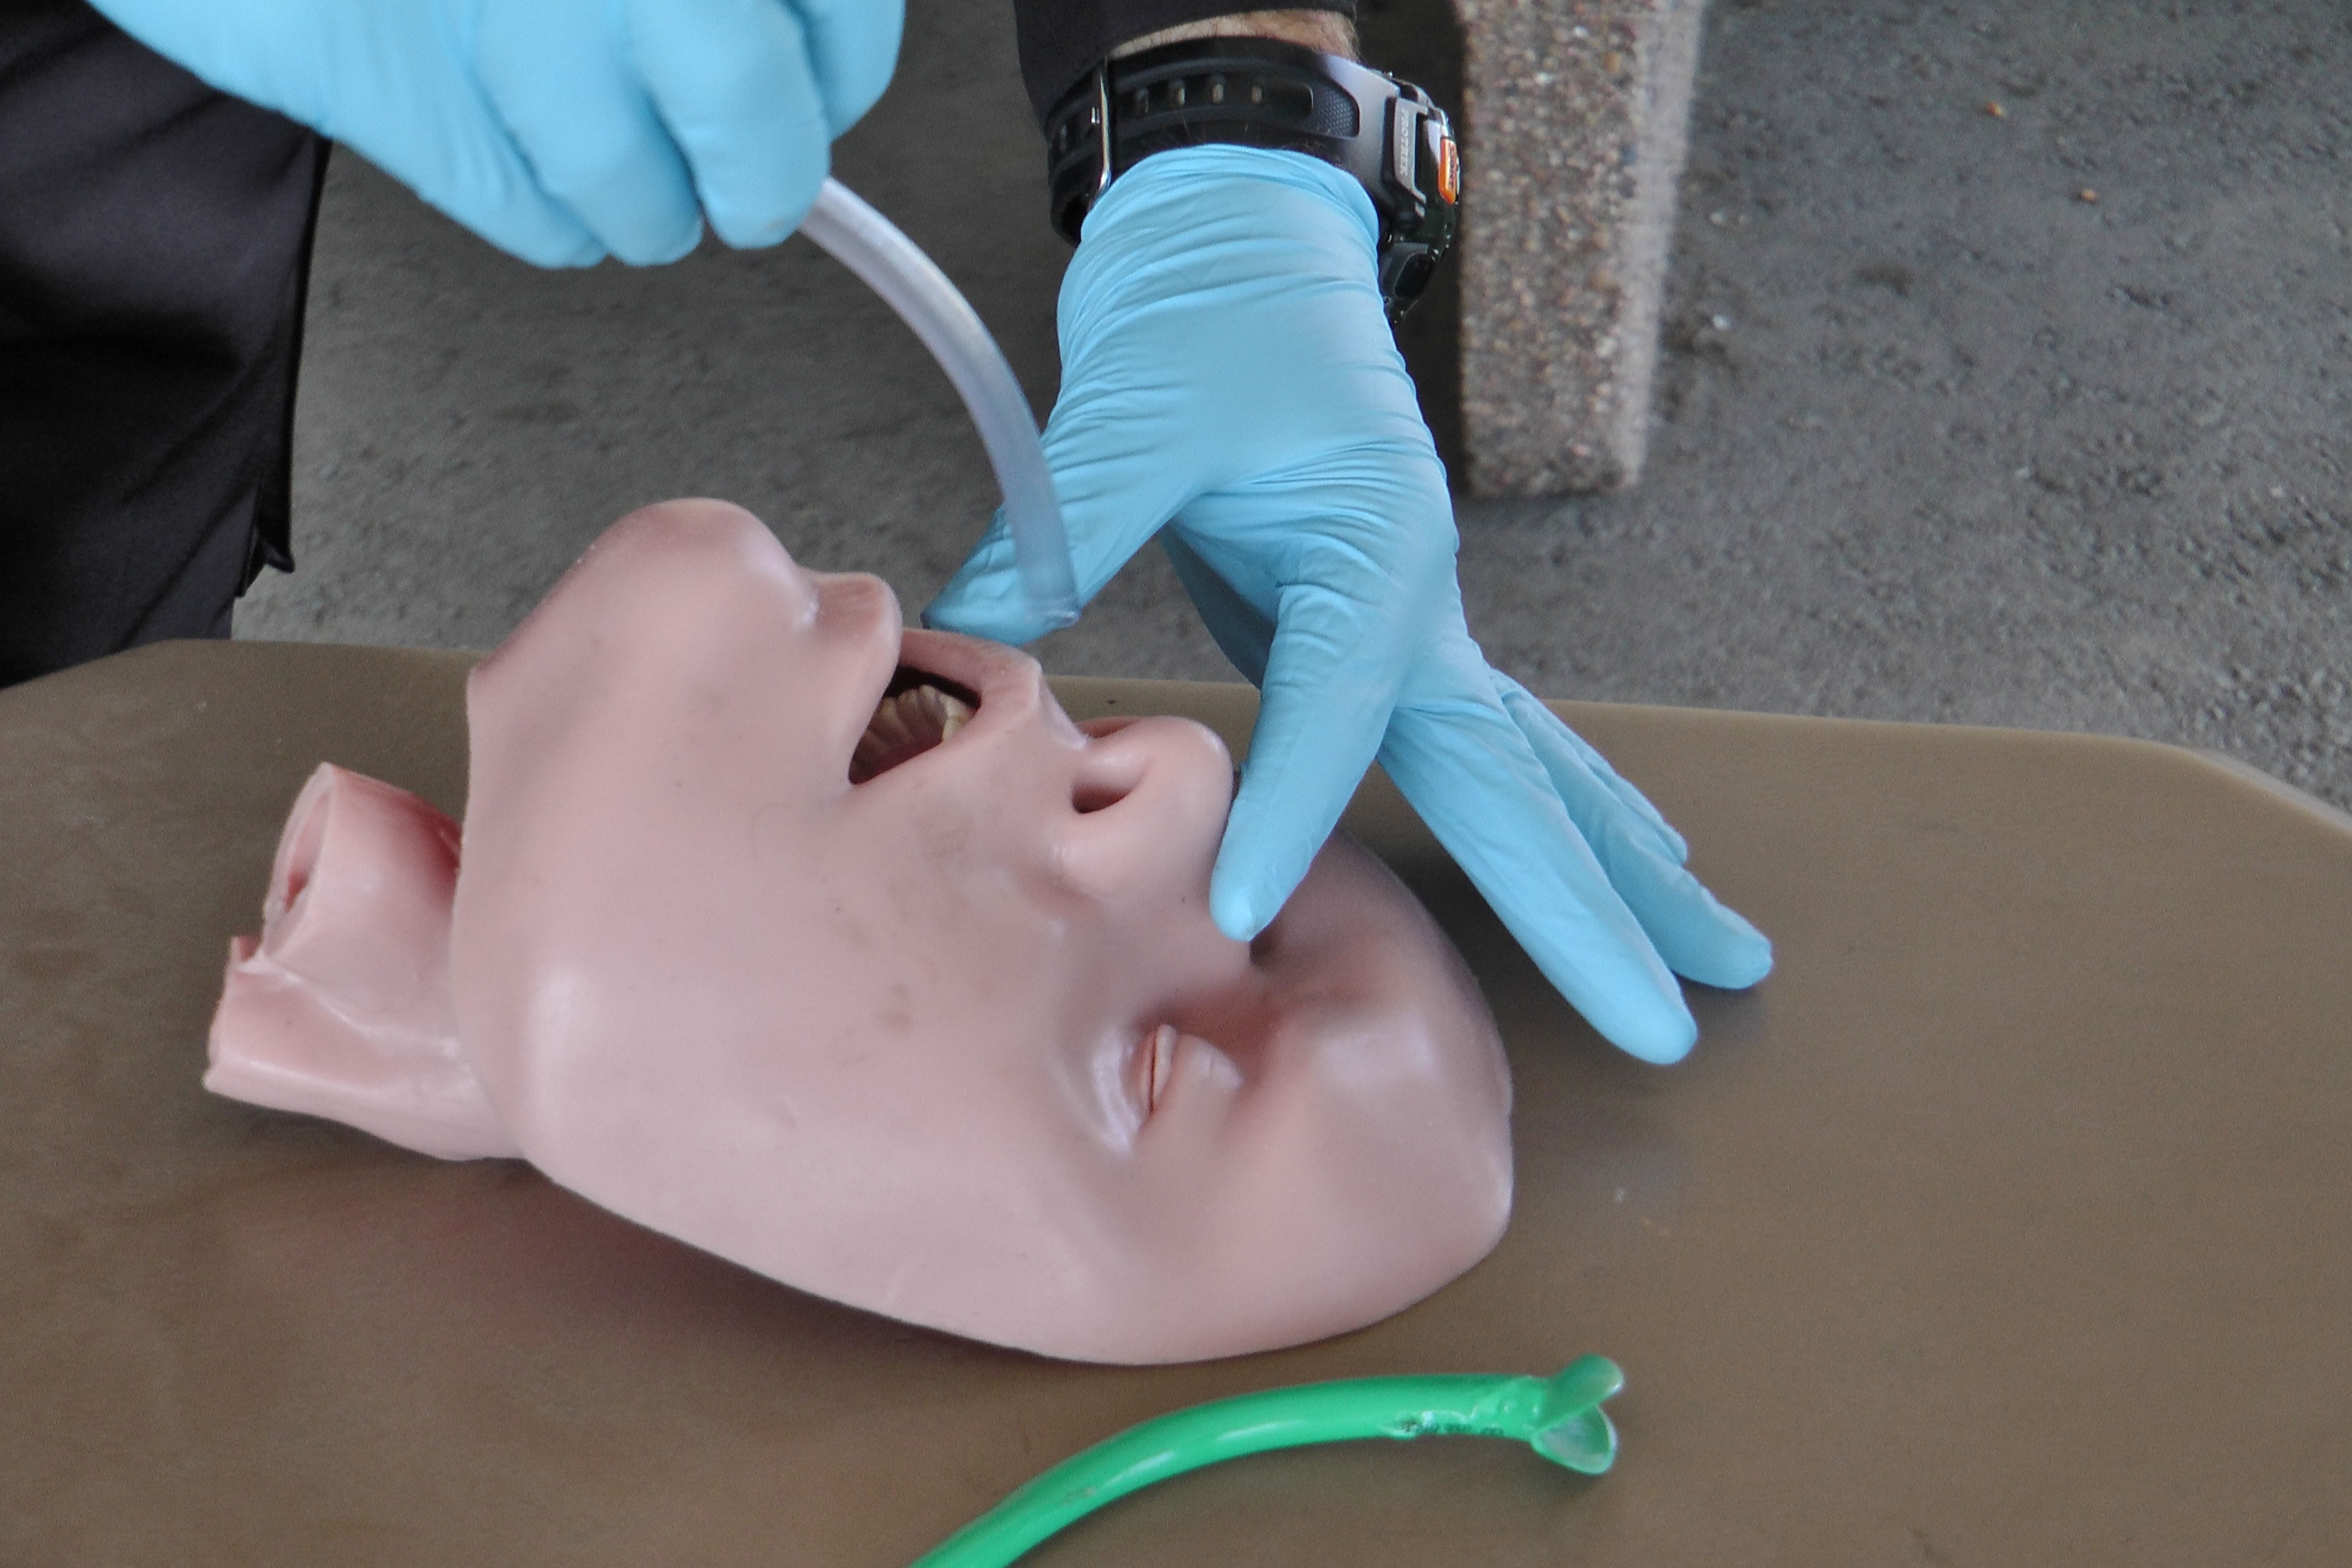 As a student, Jim had to learn combat first aid, like this photo where a nasopharyngeal airway (NPA) is inserted in the nose of a "gunshot victim."